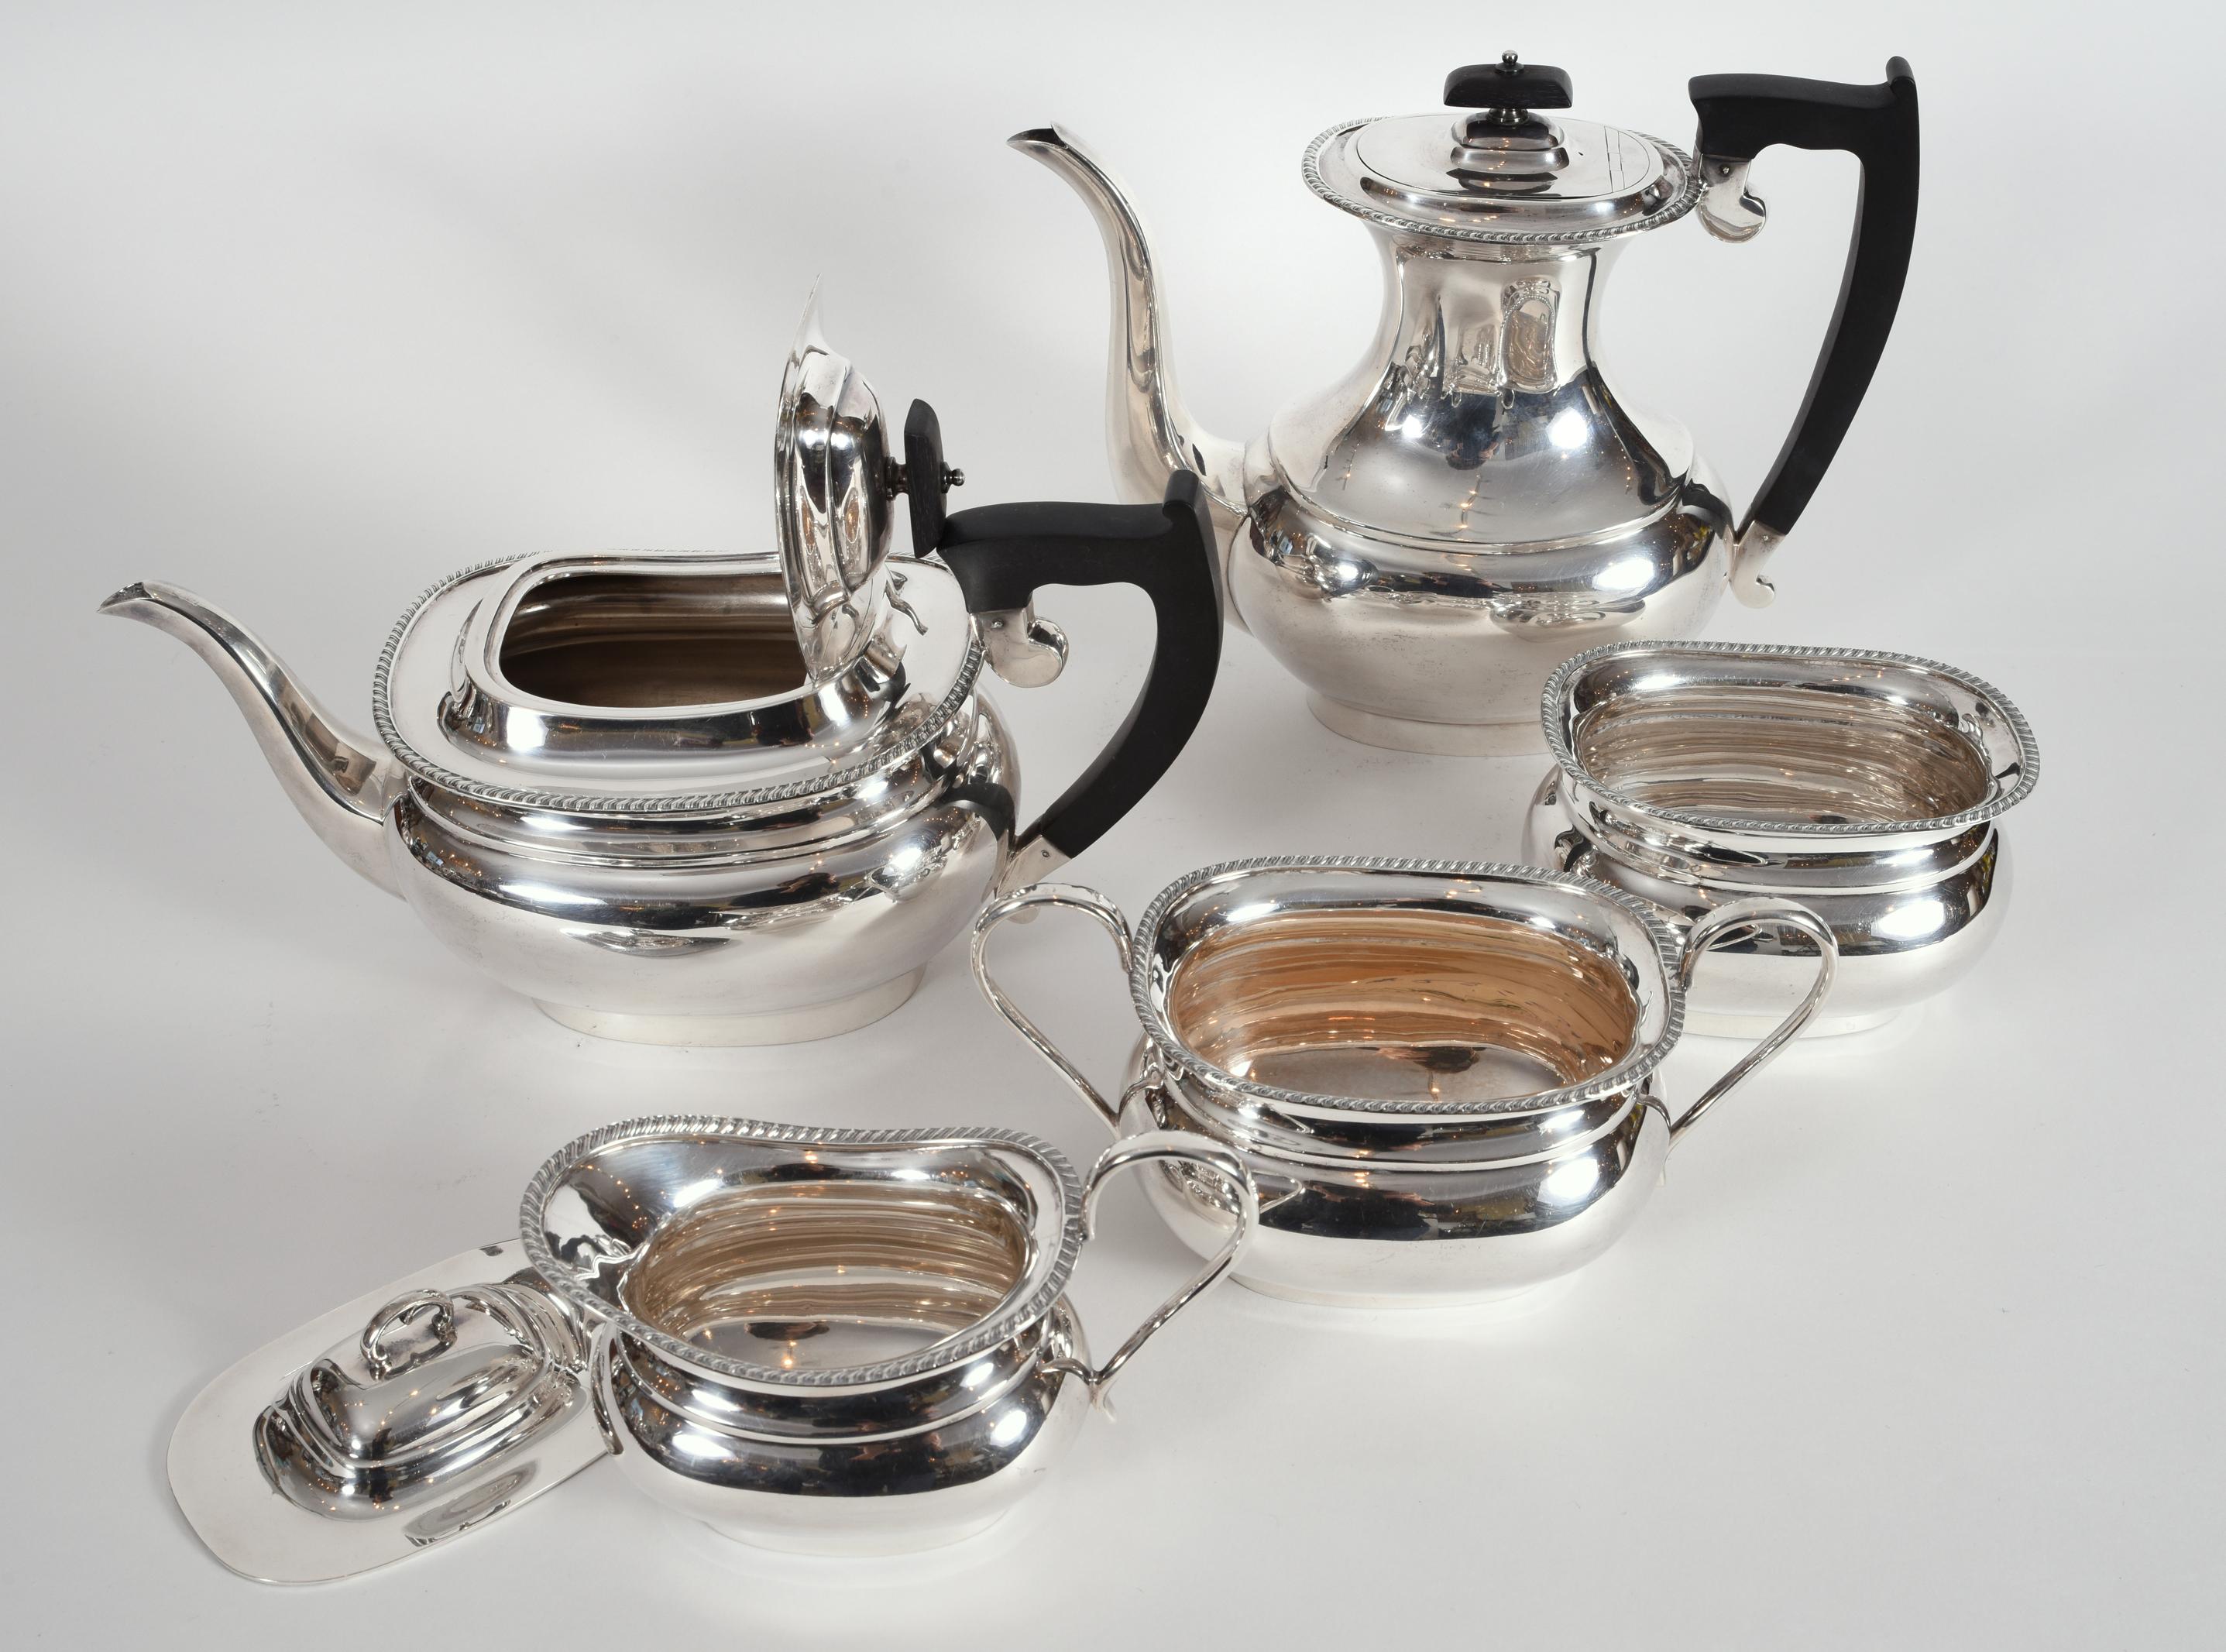 Vintage sterling silver English Sheffield five pieces tea and coffee service with black wood handle. Each piece is in excellent vintage condition, maker's mark undersigned. The sterling coffee pot is 10 inches diameter x 8.5 inches high. The